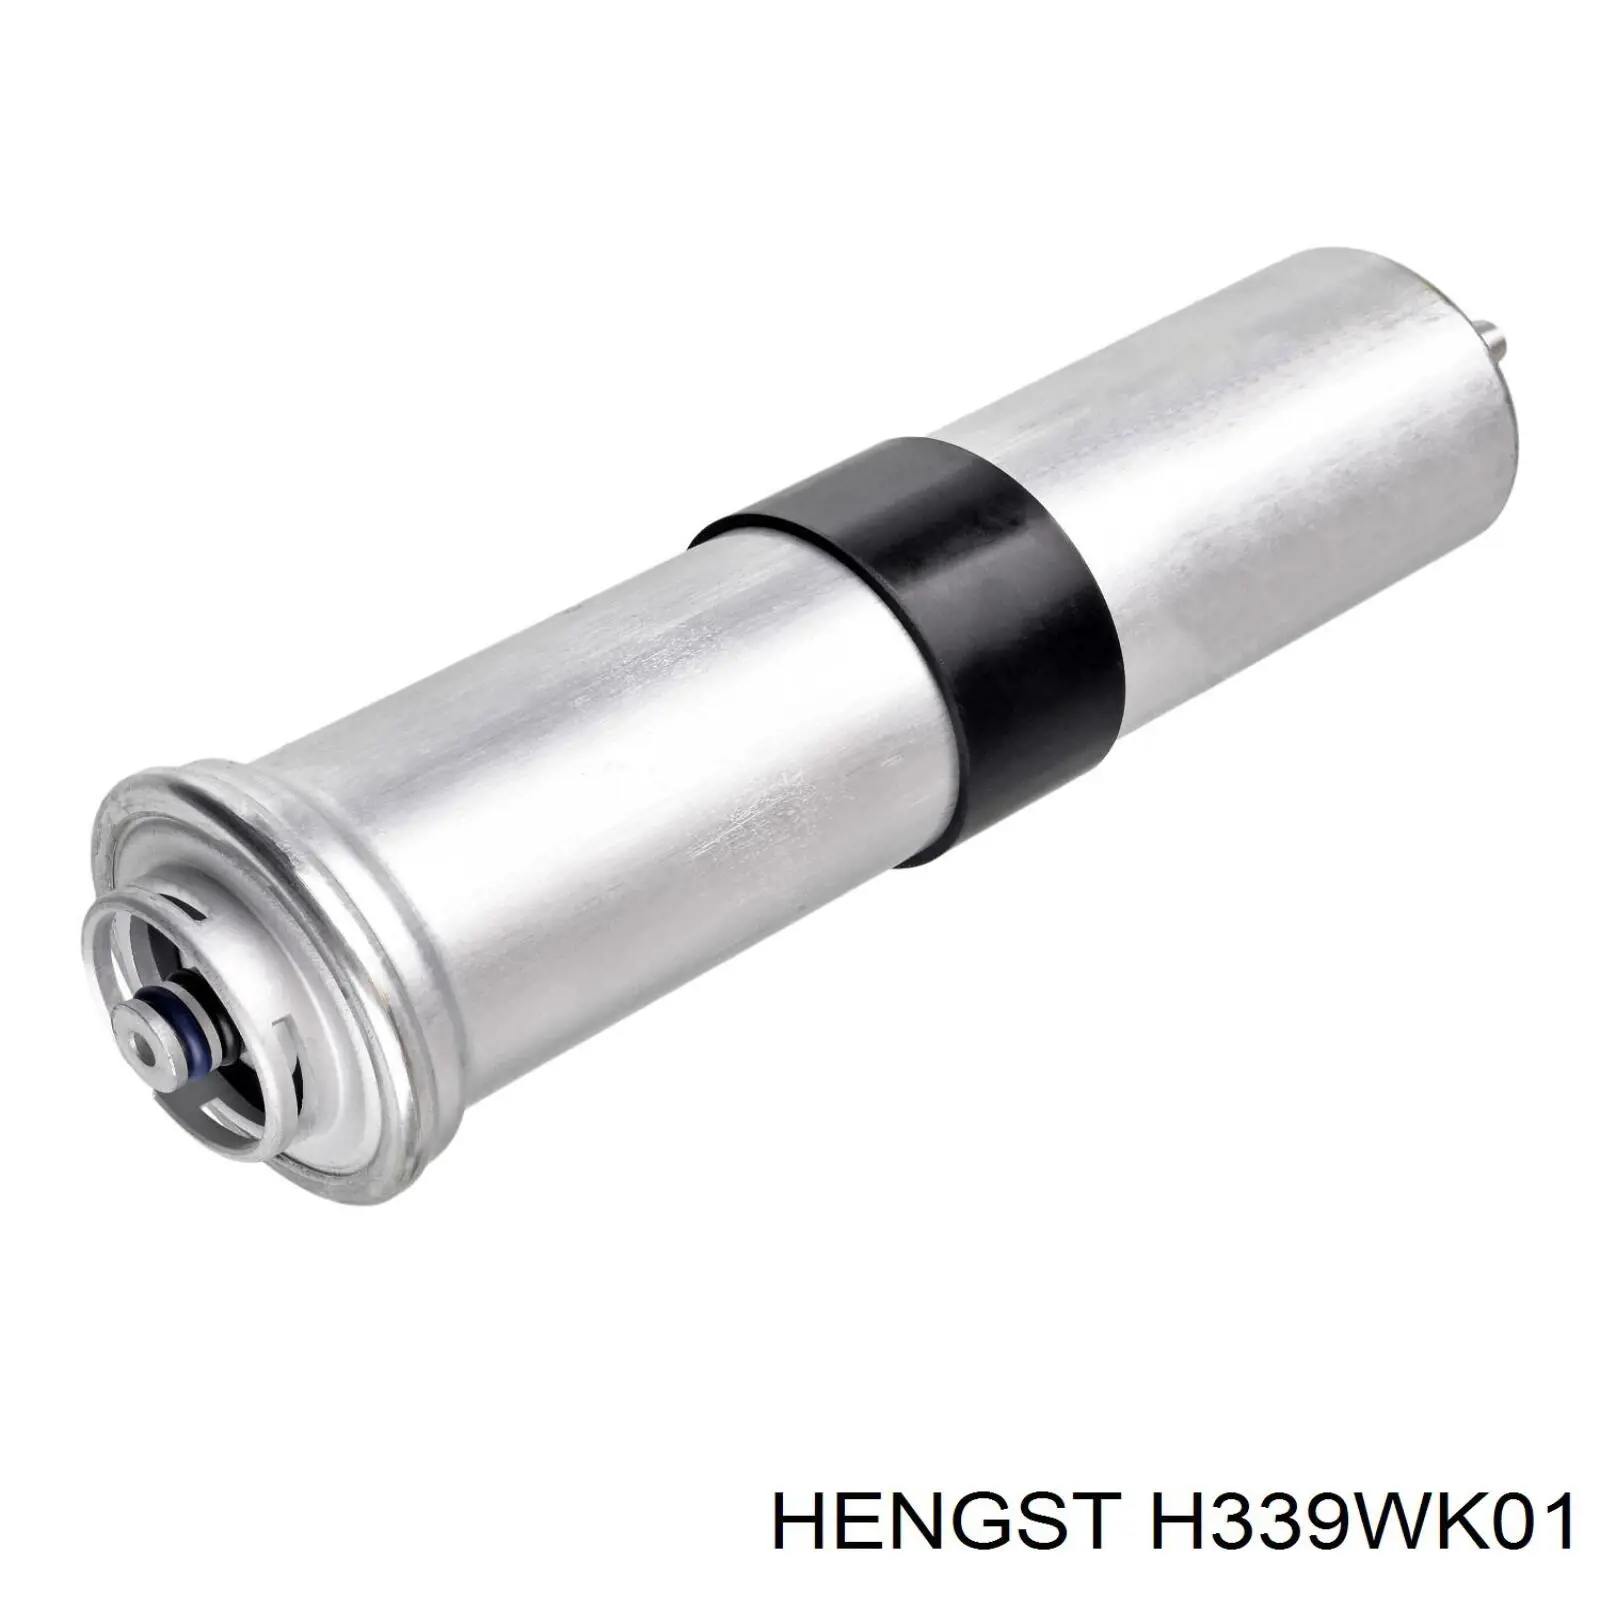 Filtro combustible H339WK01 Hengst